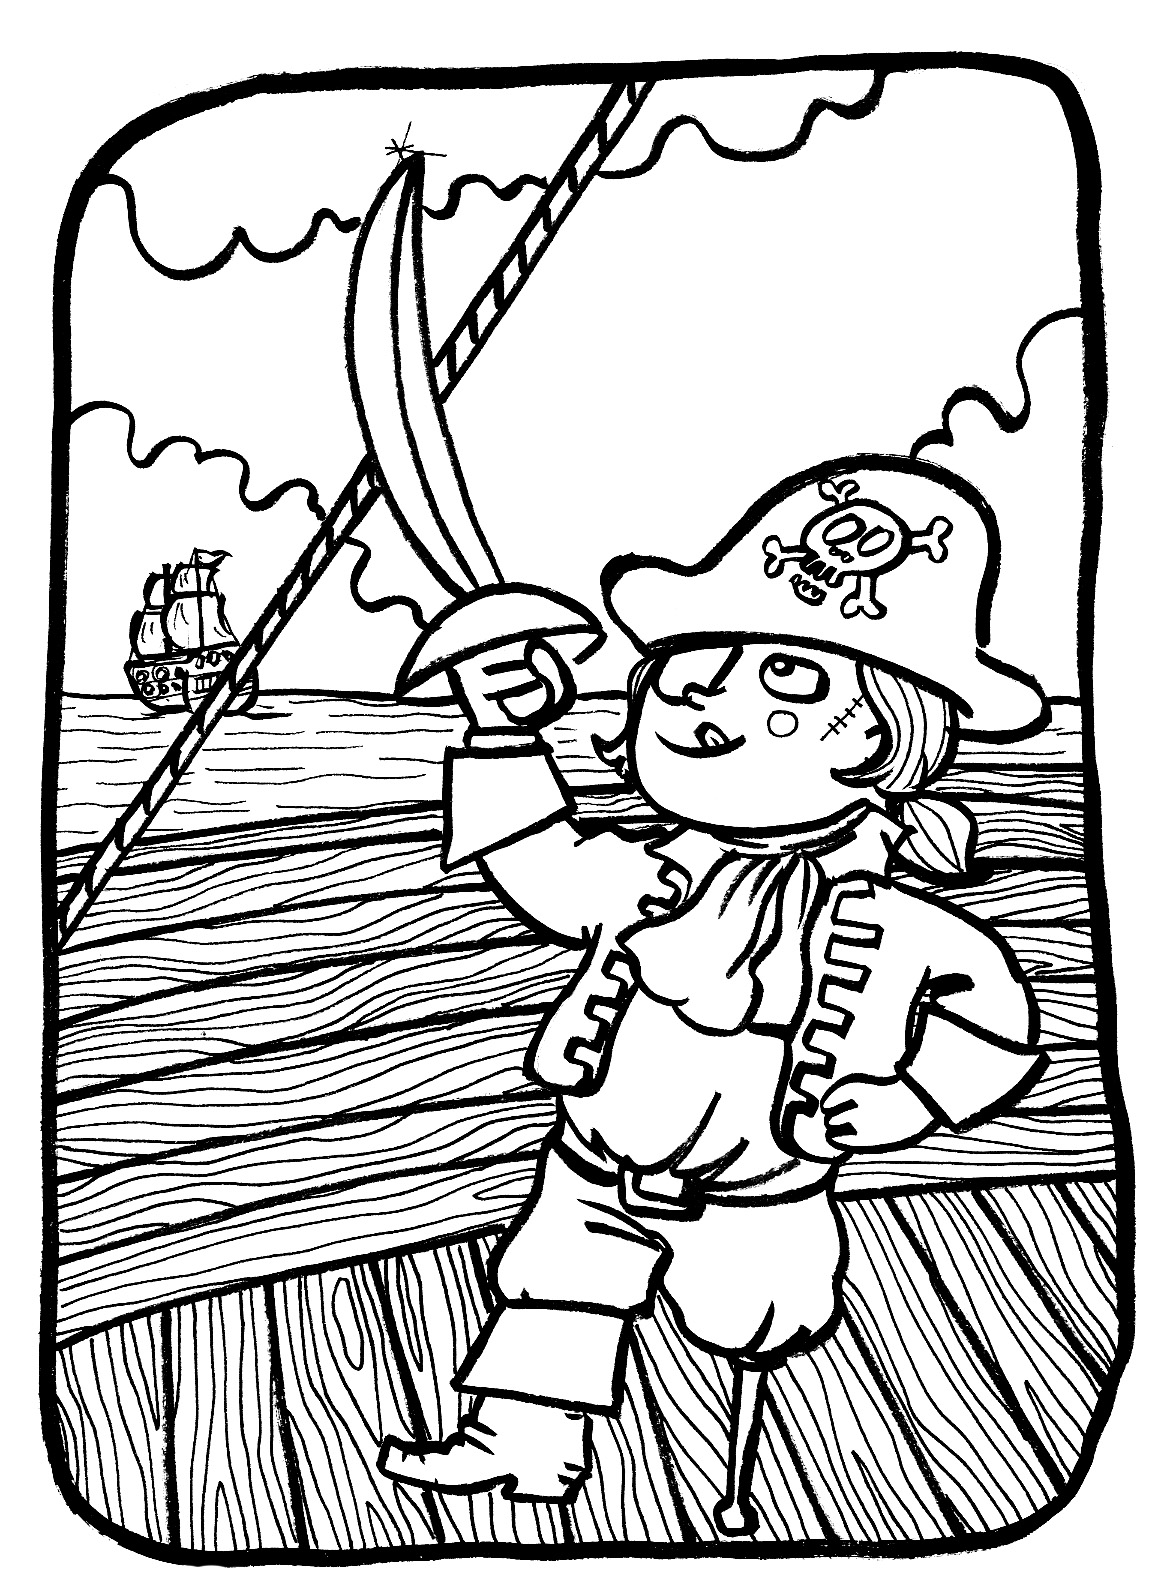 Pirate child - Pirates Coloring pages for kids to print & color